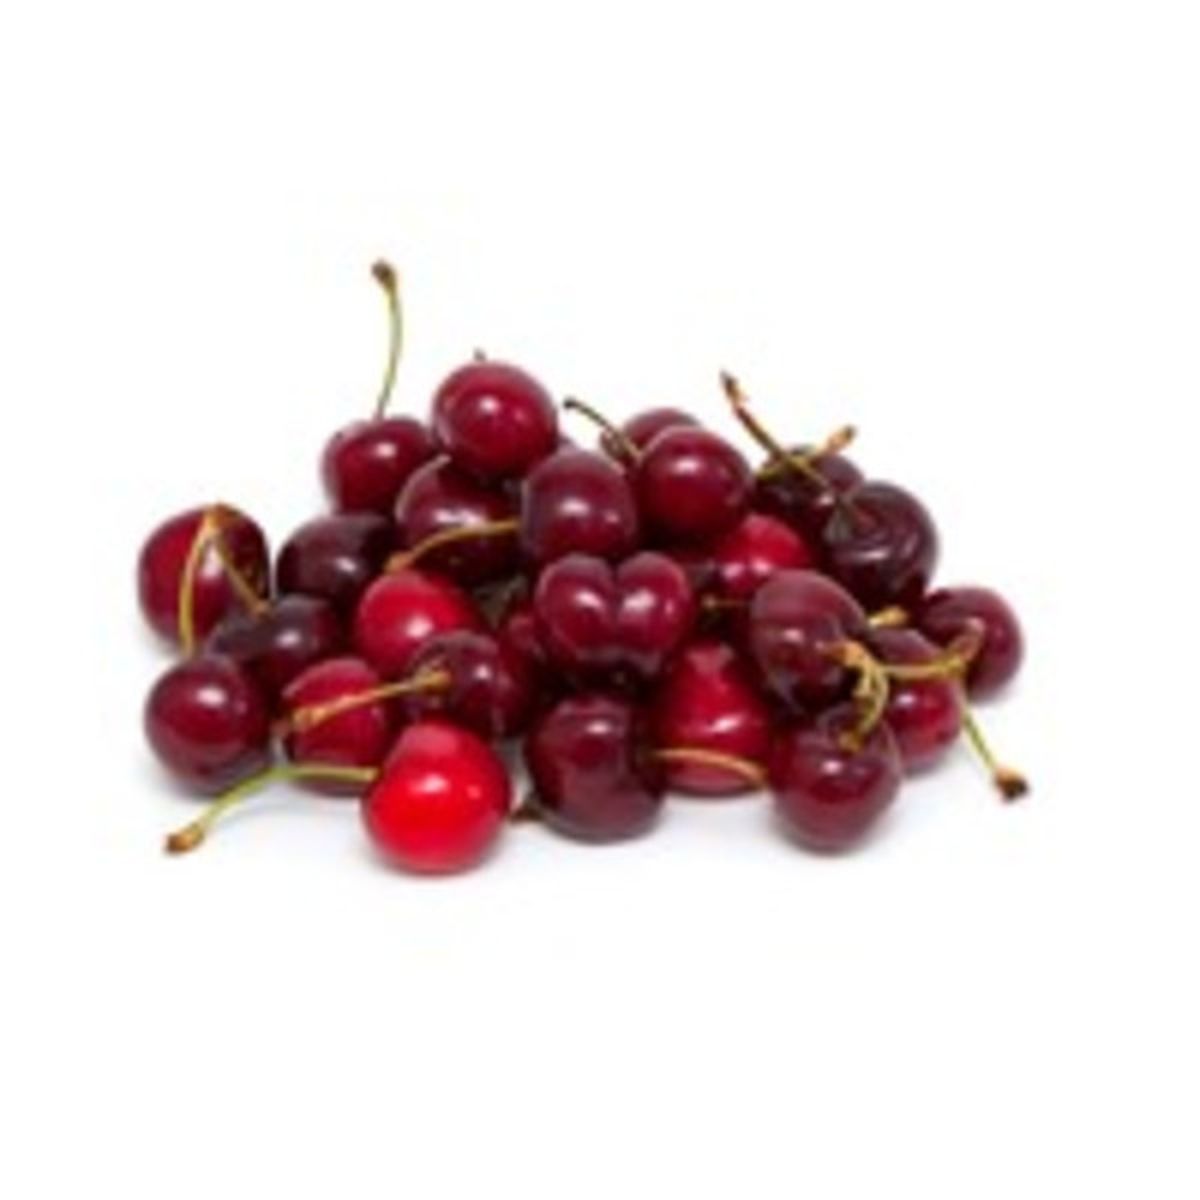 Season's Choice Cherry Berry Blend Dark Sweet Cherries, Tart Cherries,  Blueberries, Strawberries (48 oz) Delivery or Pickup Near Me - Instacart